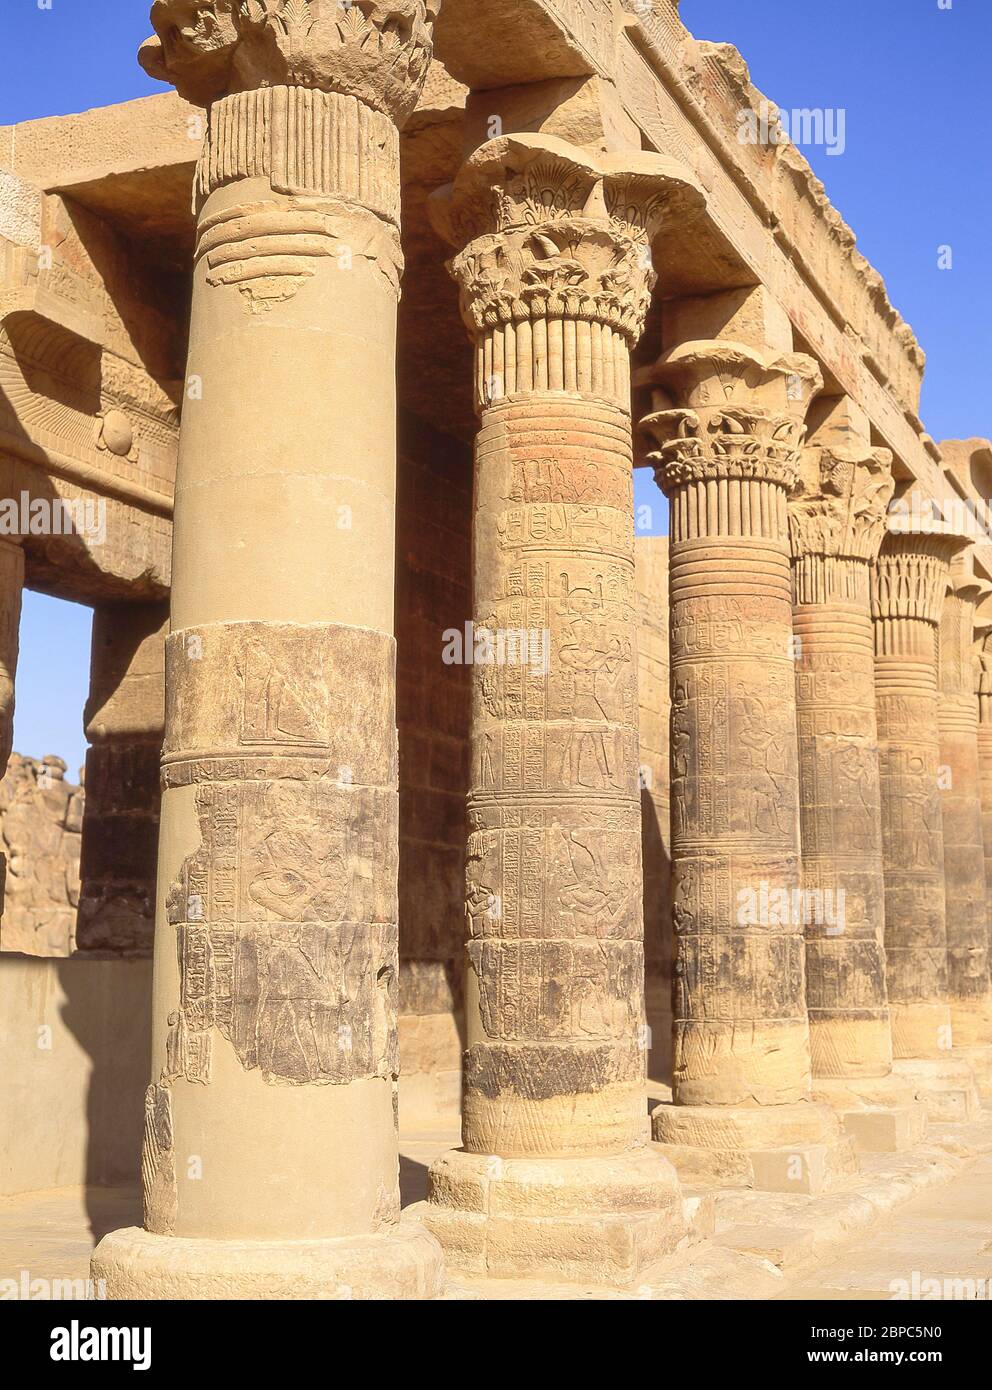 Eastern colonnade of the forecourt, The Temple of Isis, Agikia Island, Lake Nasser, Aswan, Aswan Governorate, Republic of Egypt Stock Photo